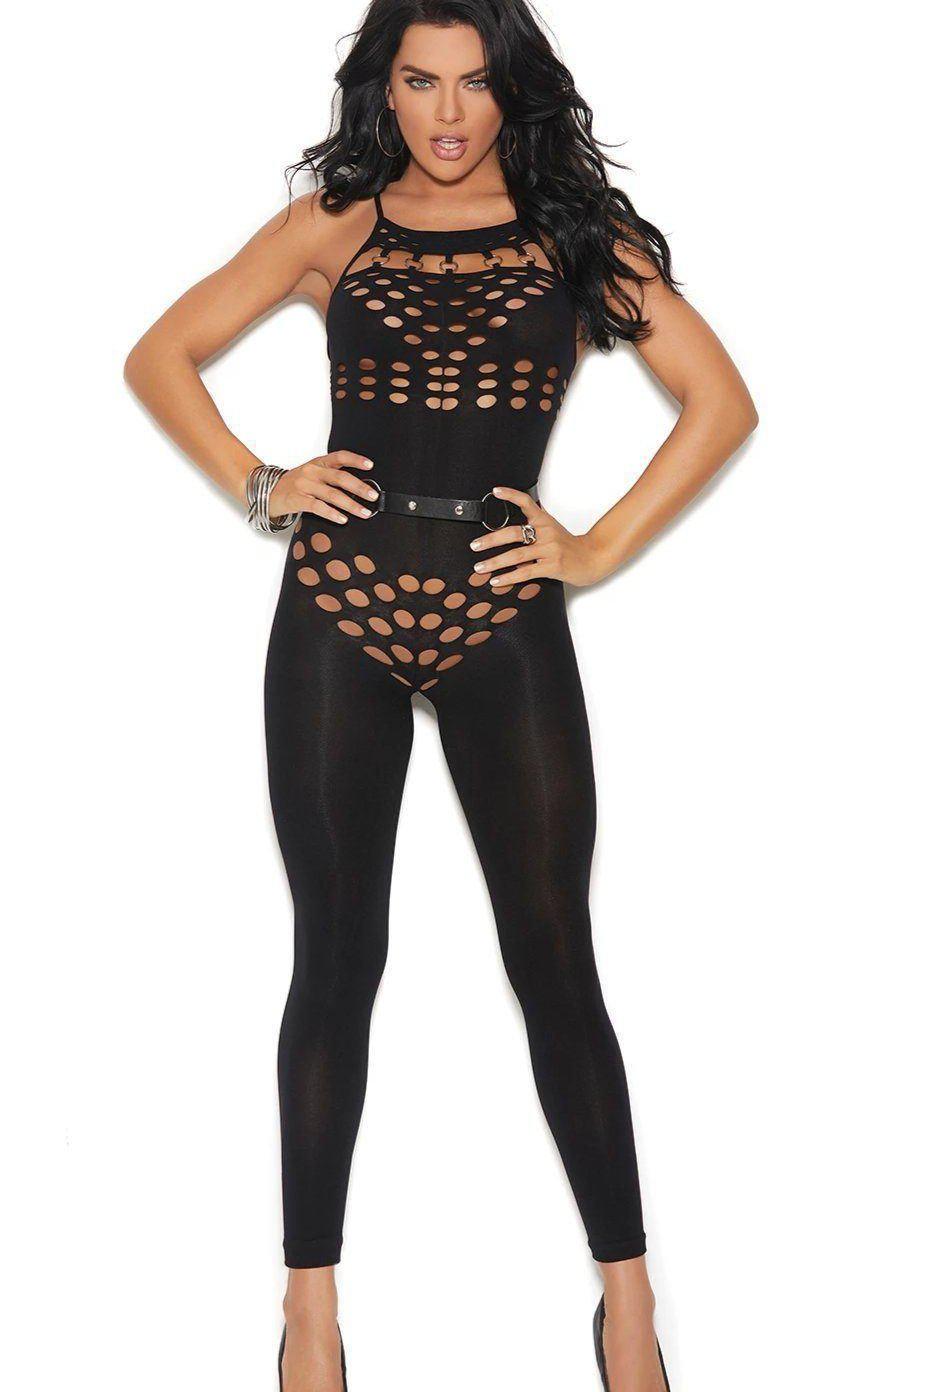 Halter Footless Bodystocking-Elegant Moments-SEXYSHOES.COM